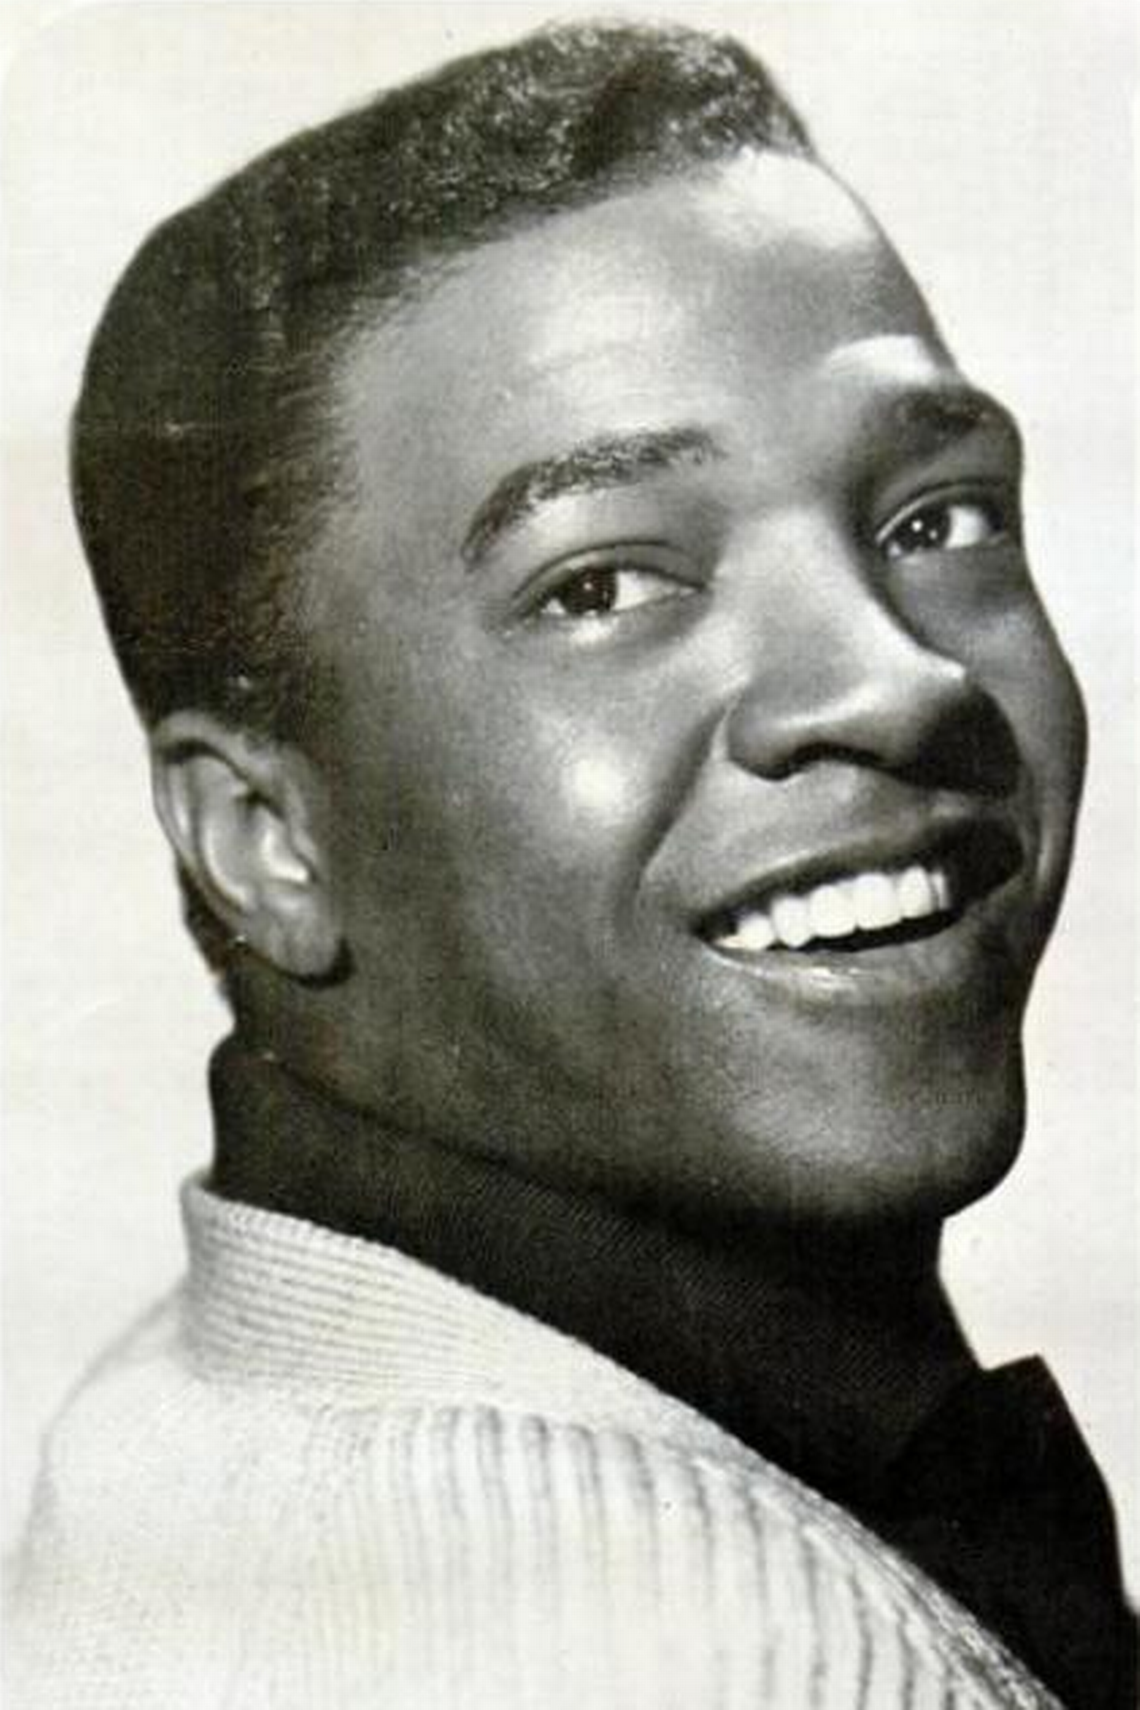 Clyde McPhatter in a publicity photo from March 1965. McPhatter brought his gospel singing experience to R&B songs with the Drifters and in his solo career.